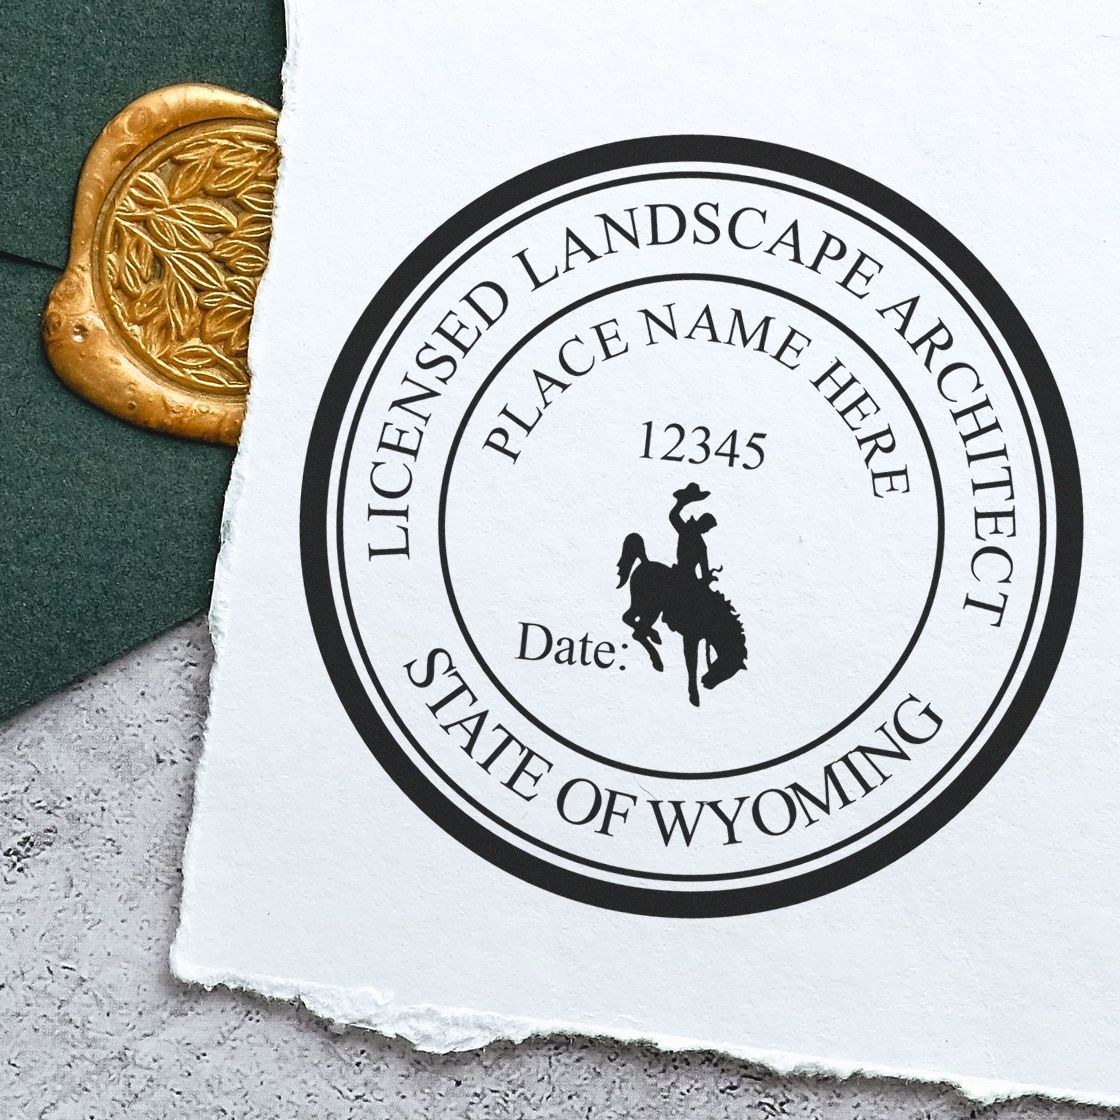 A stamped impression of the Self-Inking Wyoming Landscape Architect Stamp in this stylish lifestyle photo, setting the tone for a unique and personalized product.